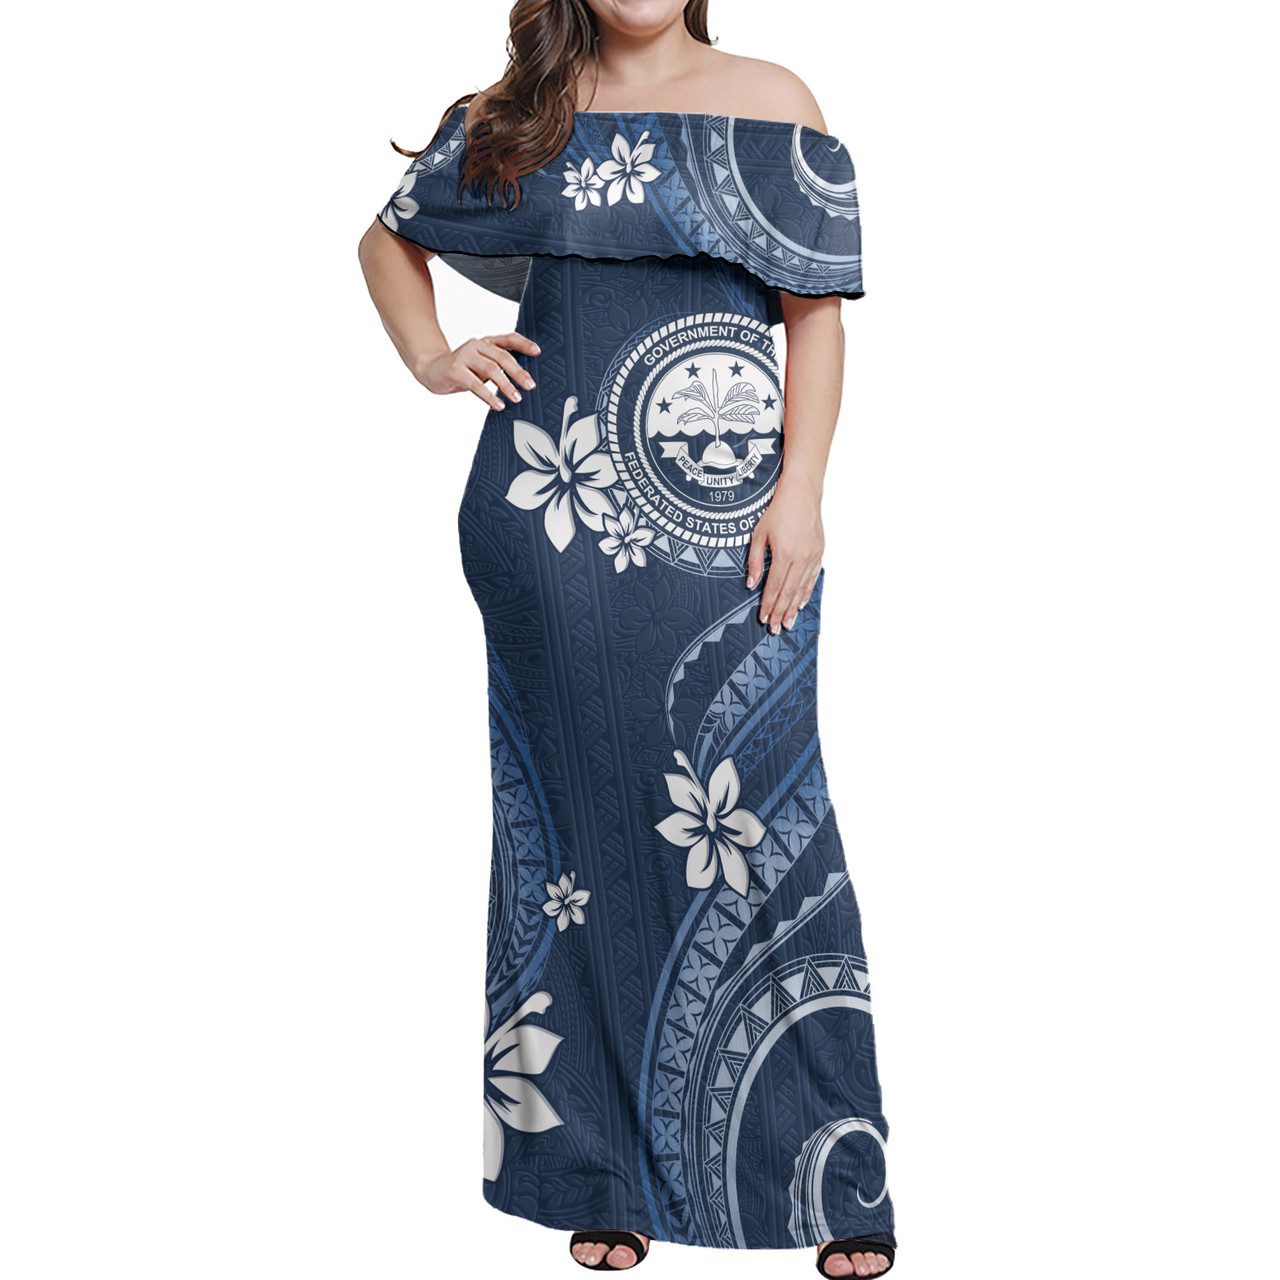 Federated States Of Micronesia Off Shoulder Long Dress White Hibiscus Blue Pattern